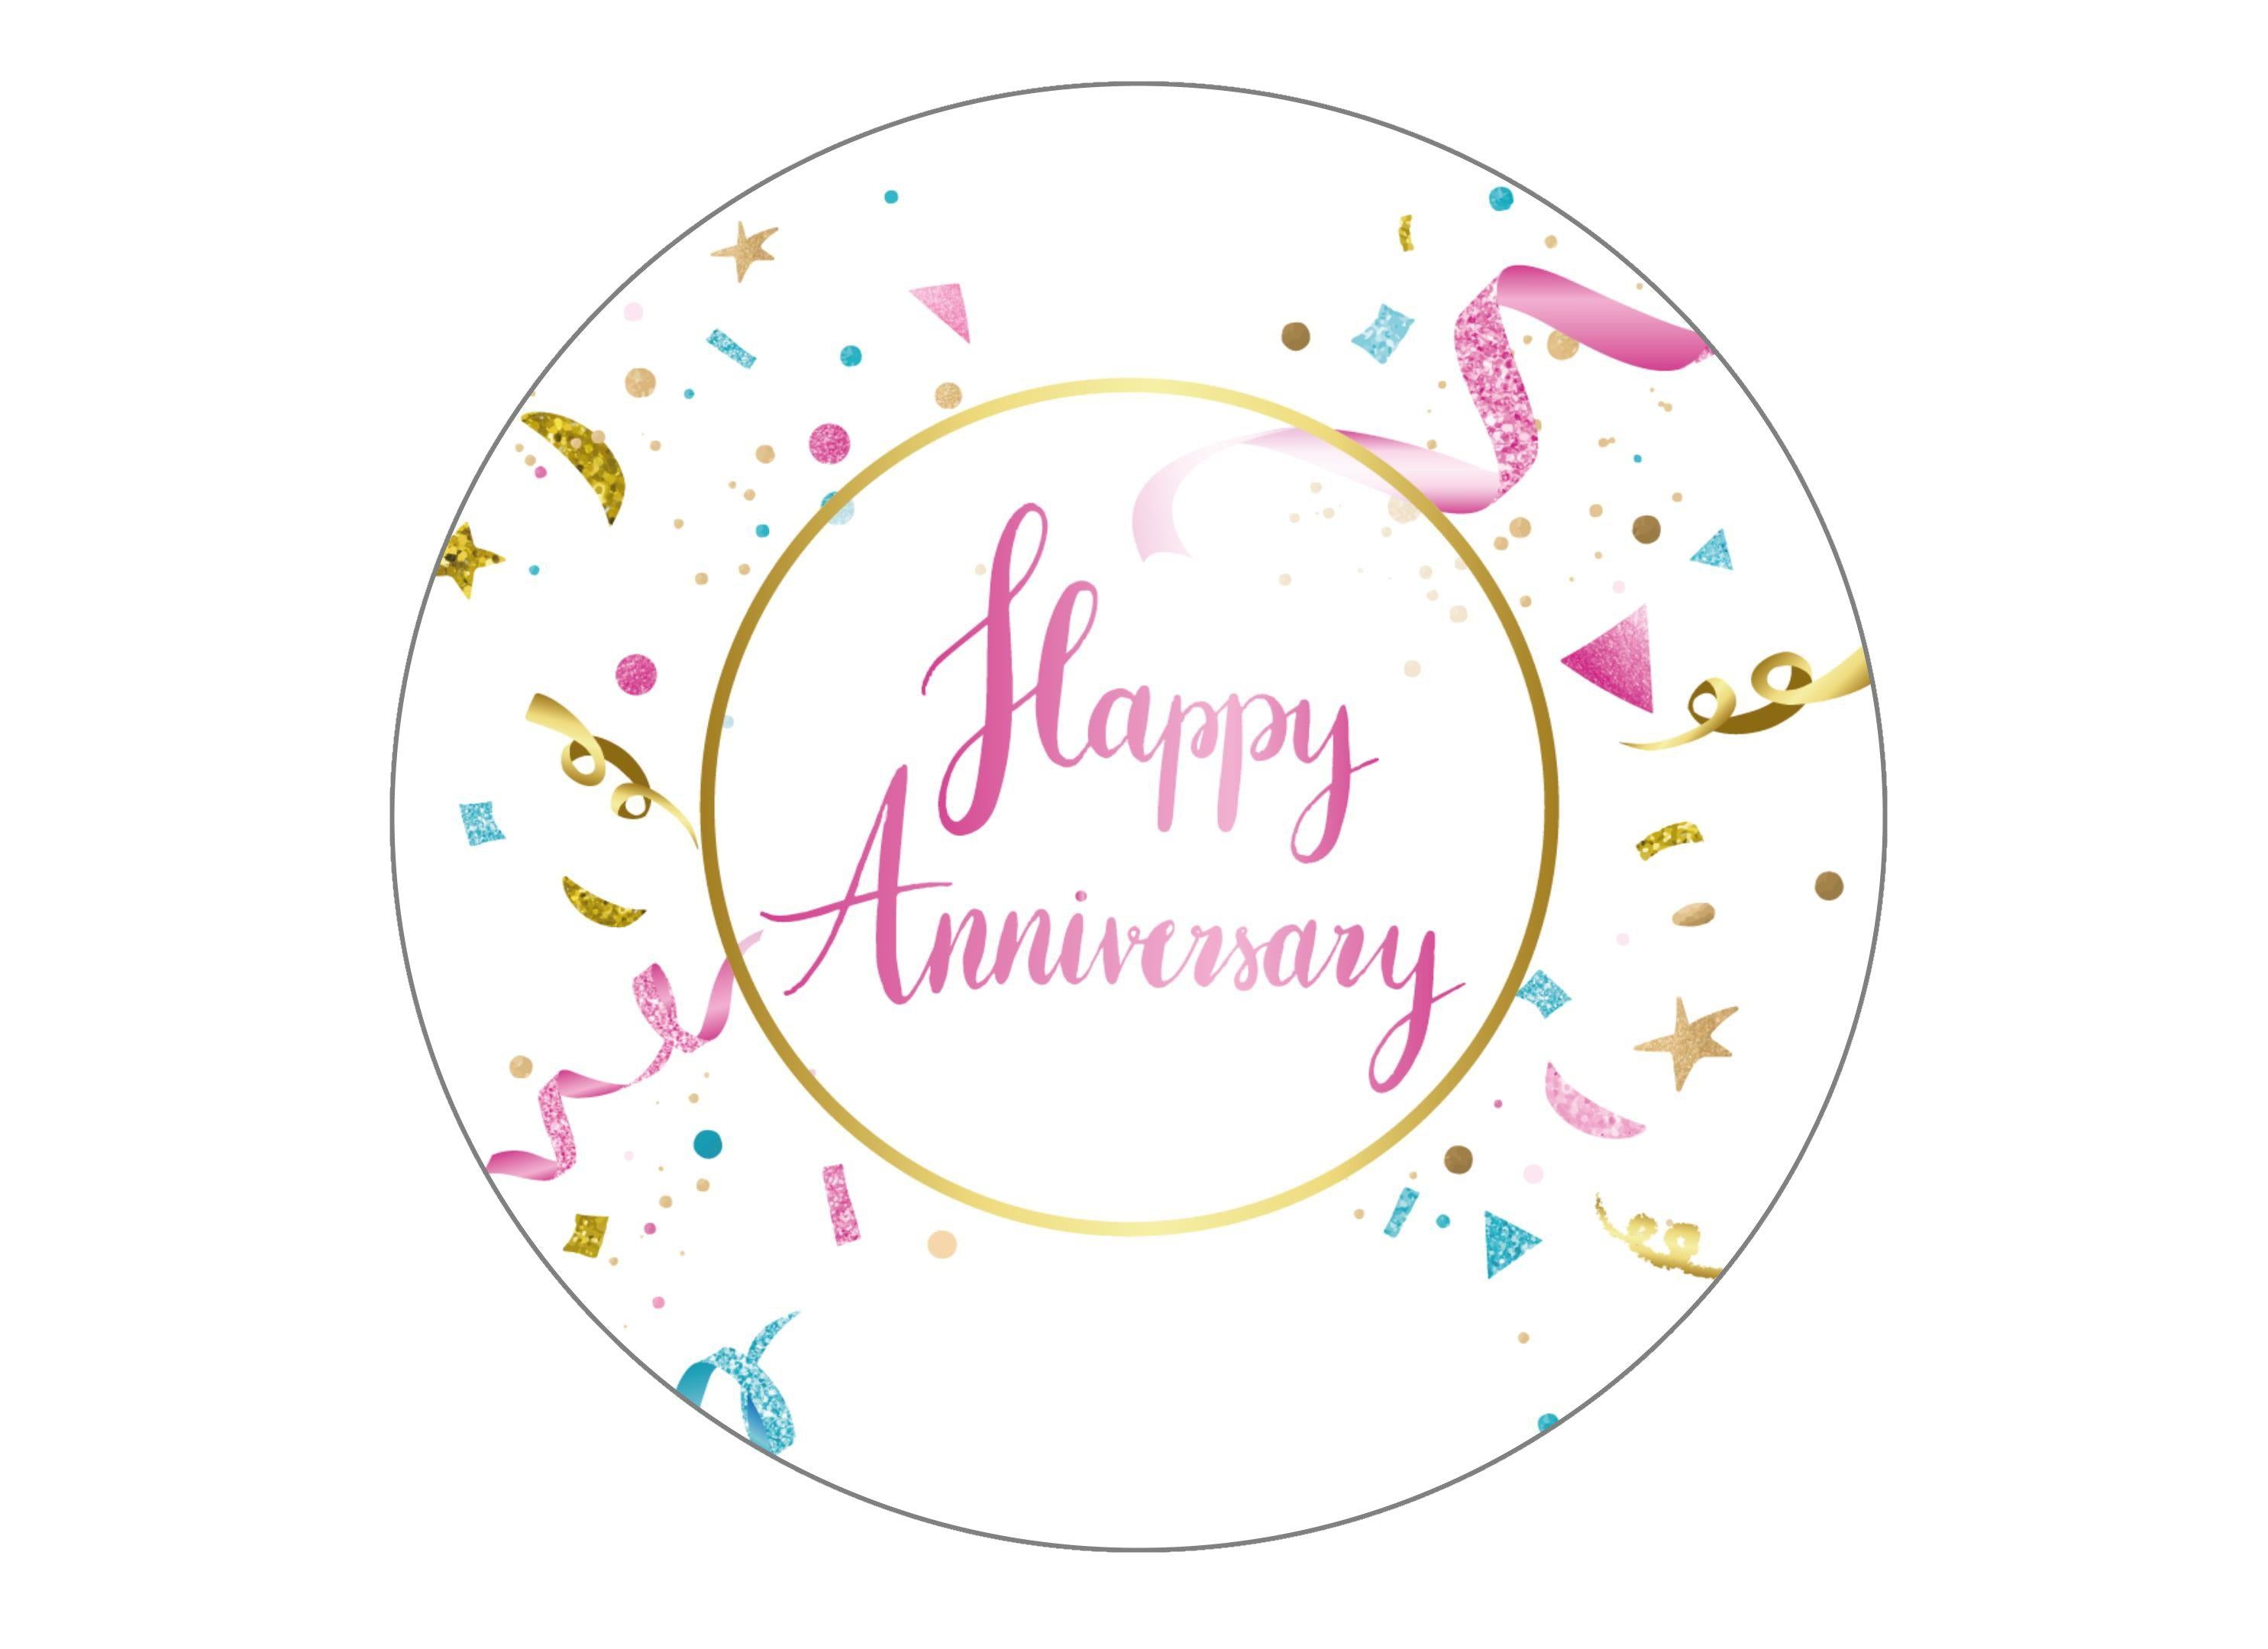 Large round cake topper suitable for an anniversary of any kind